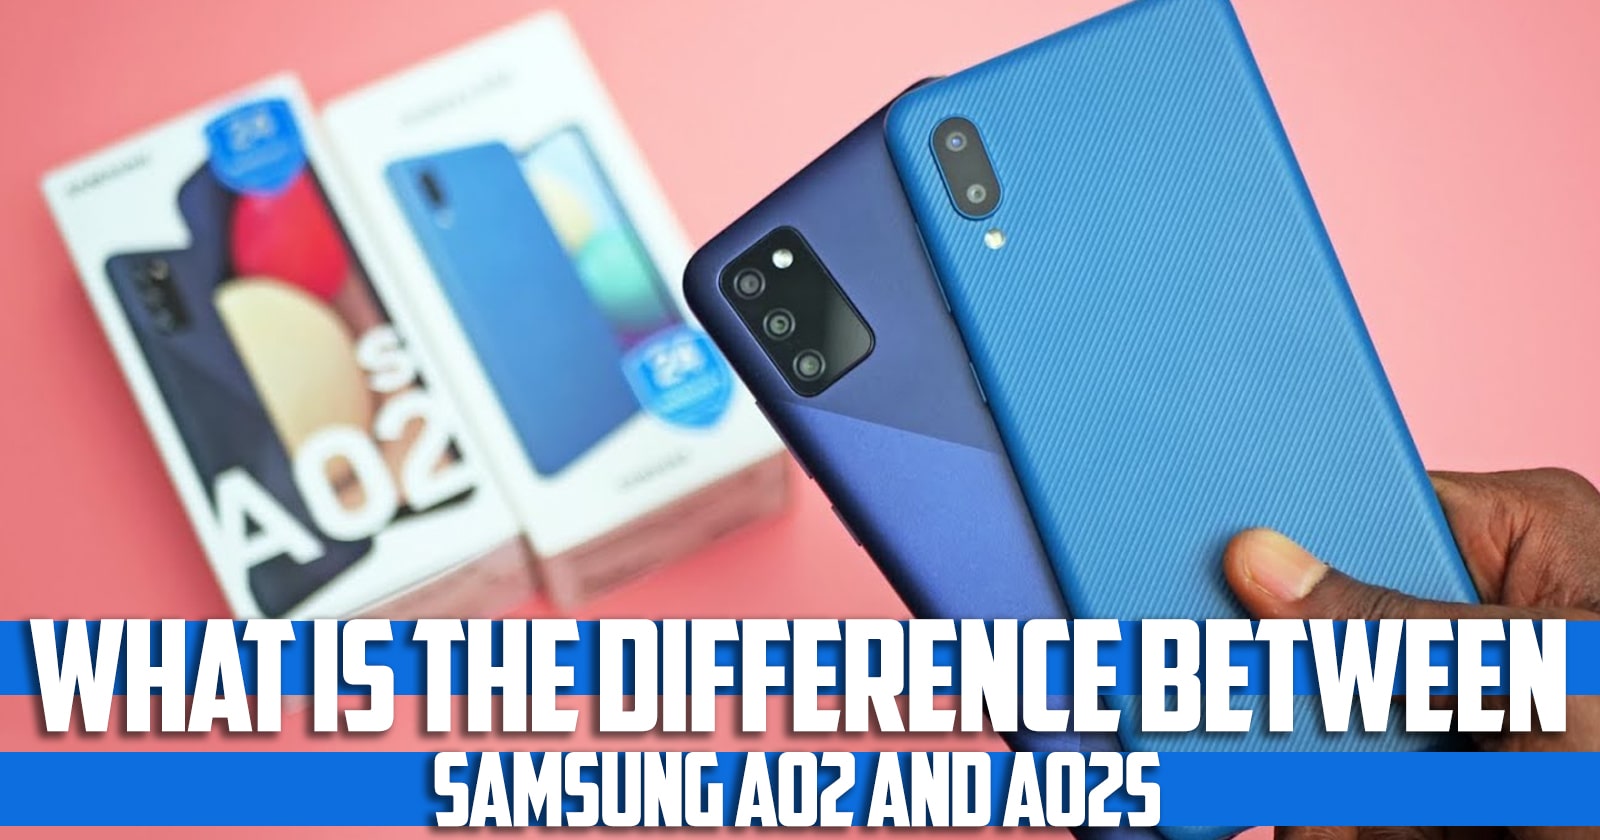 What is the difference between Samsung a02 and a02s?